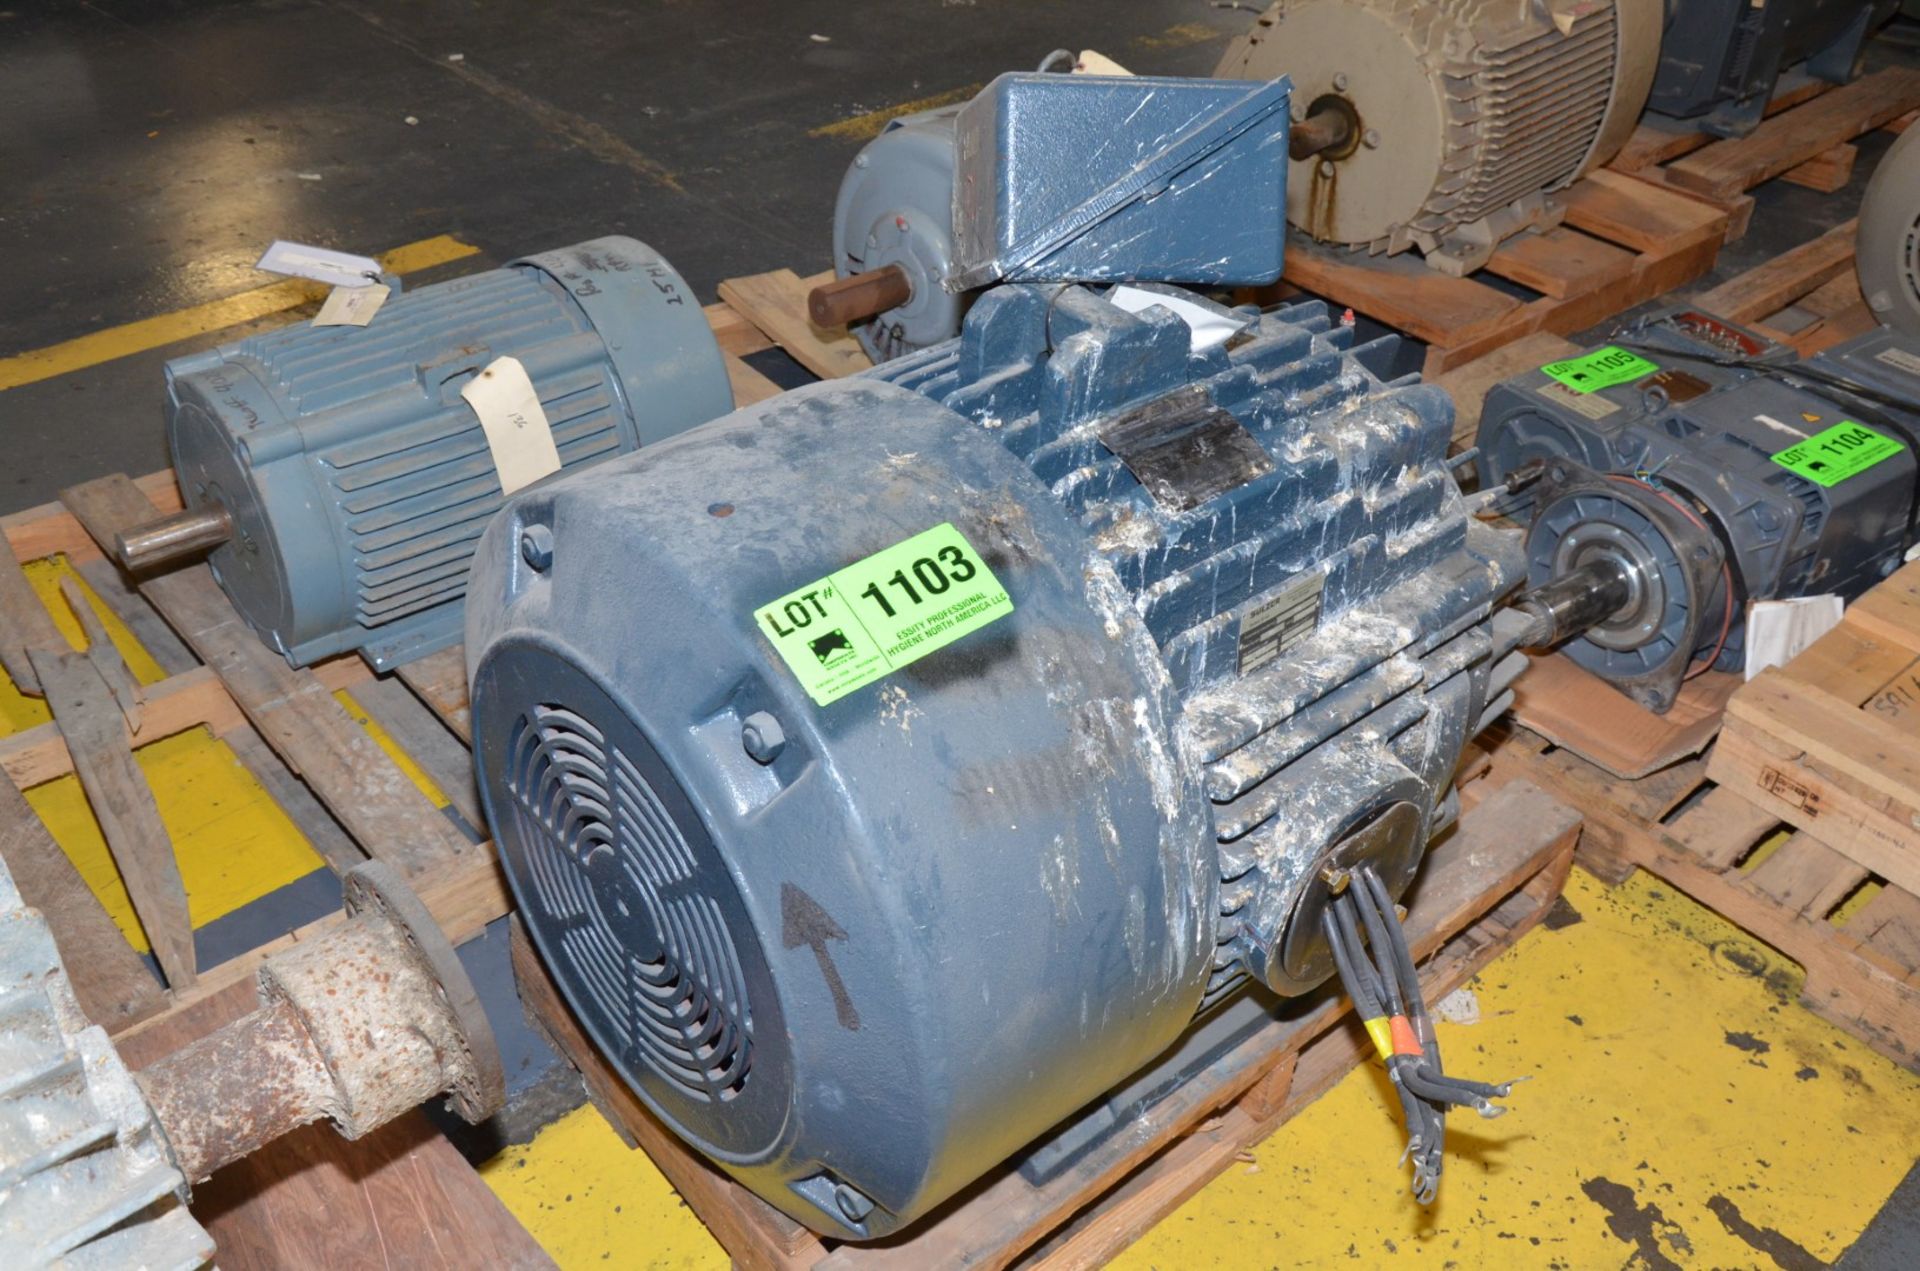 MARATHON 150 HP 460V 1190 RPM ELECTRIC MOTOR [RIGGING FEE FOR LOT #1103 - $25 USD PLUS APPLICABLE